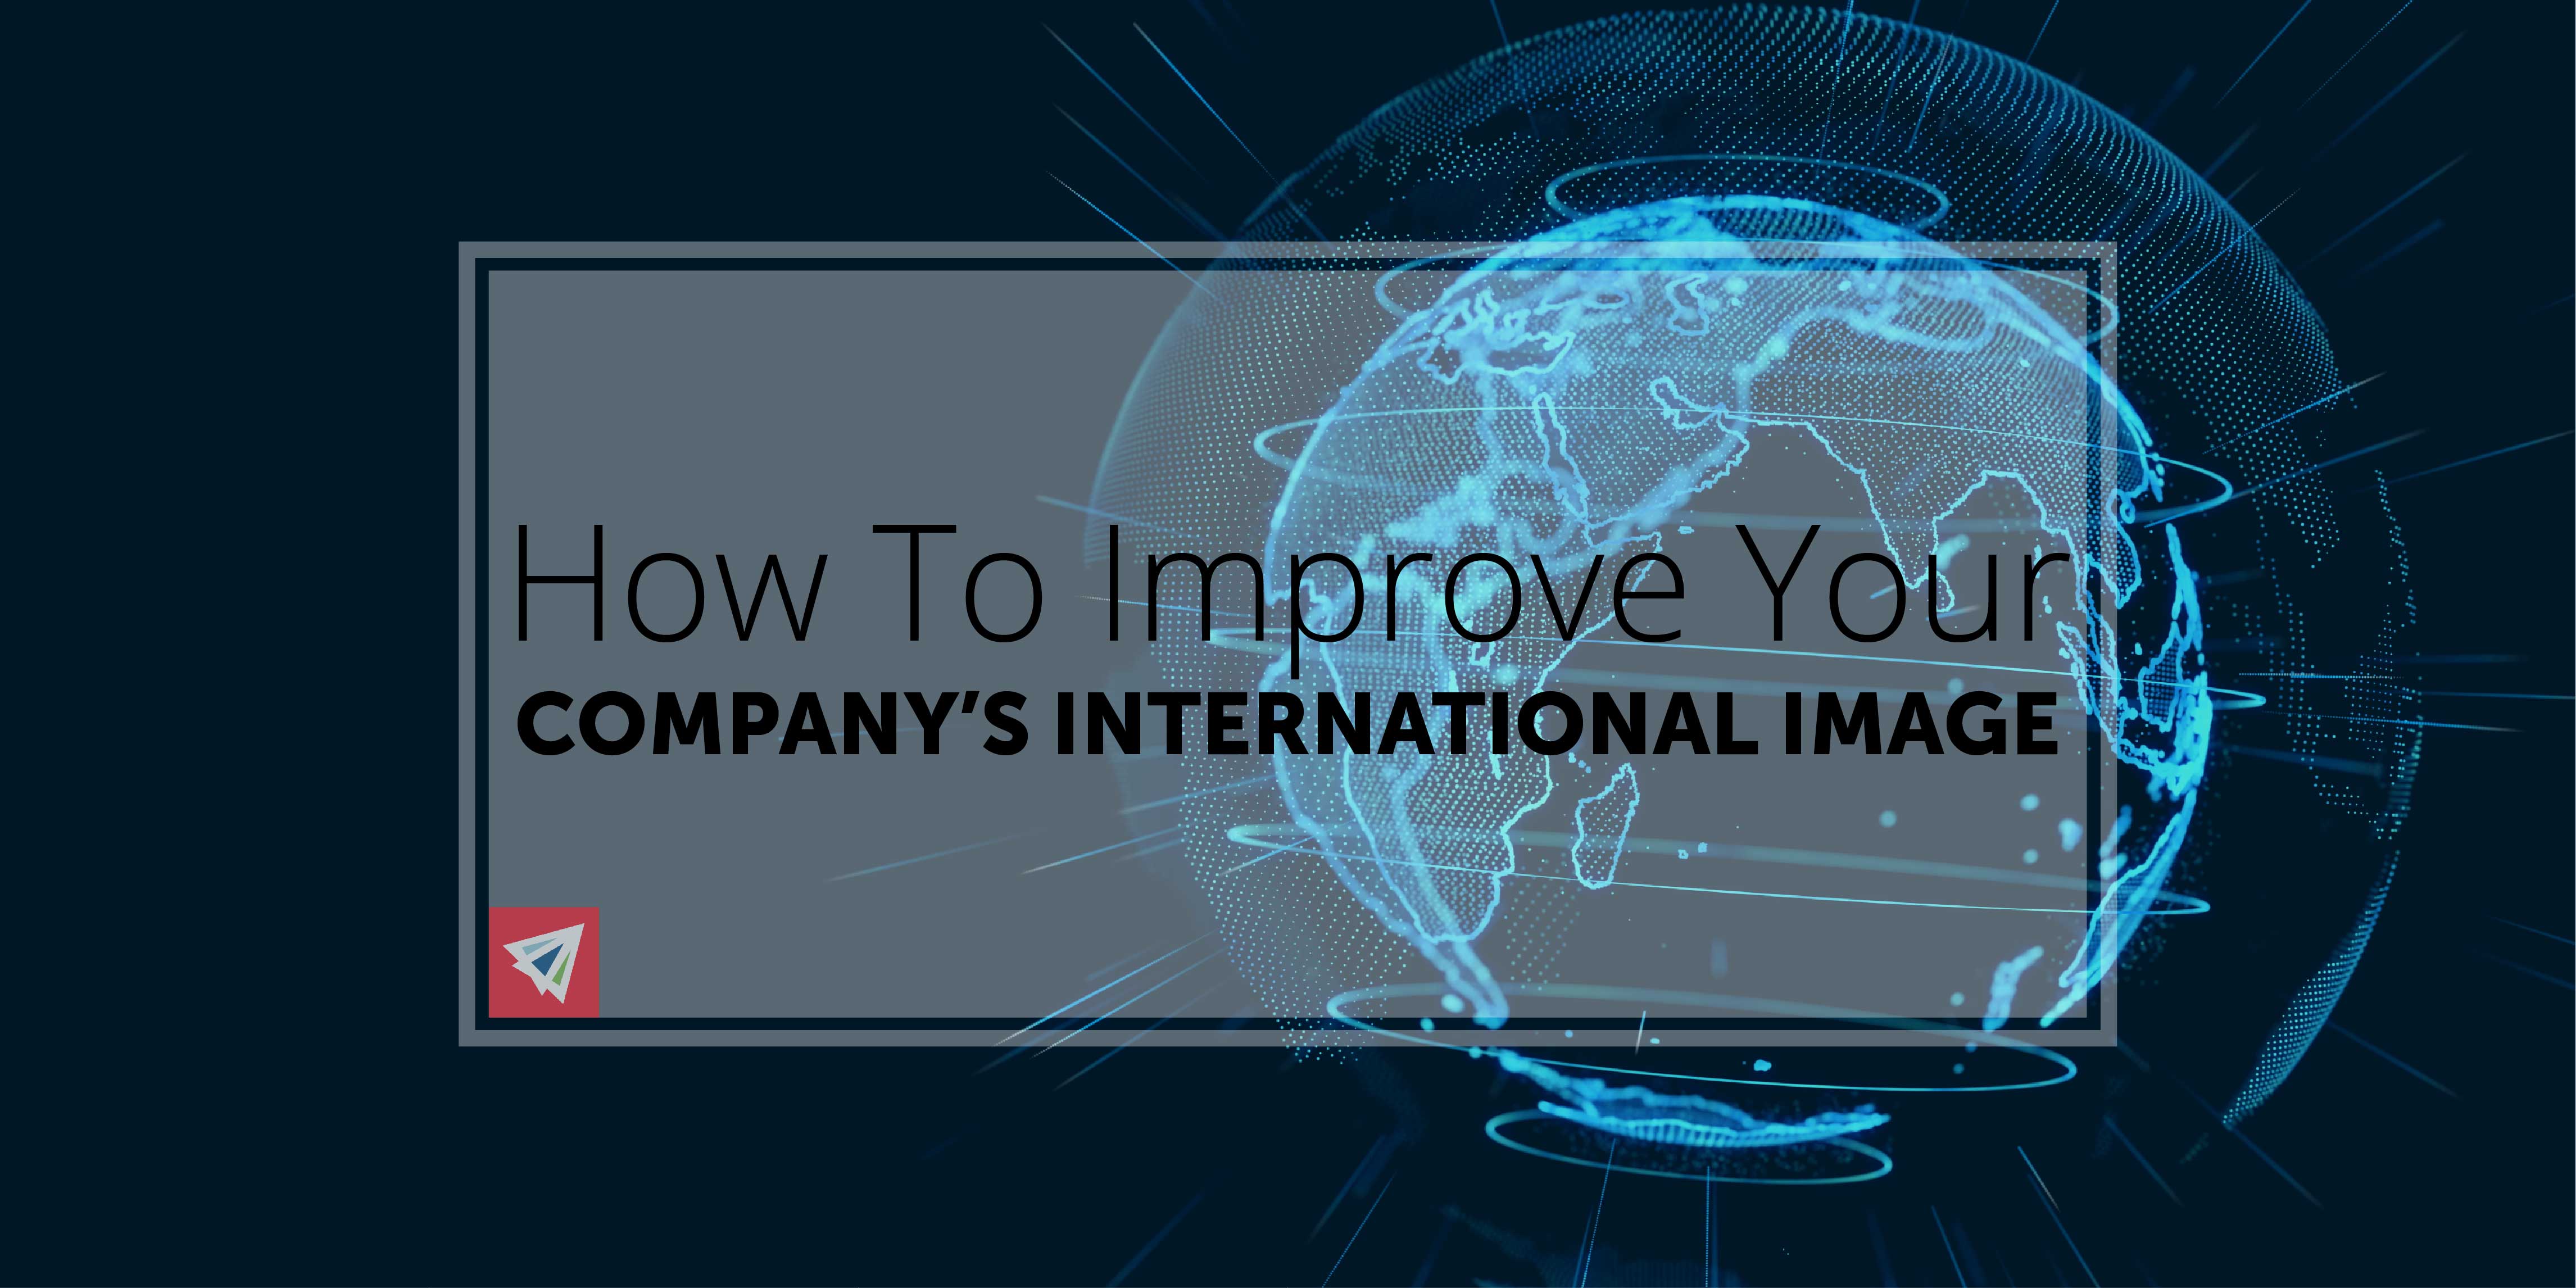 How To Improve Your Company's International Image